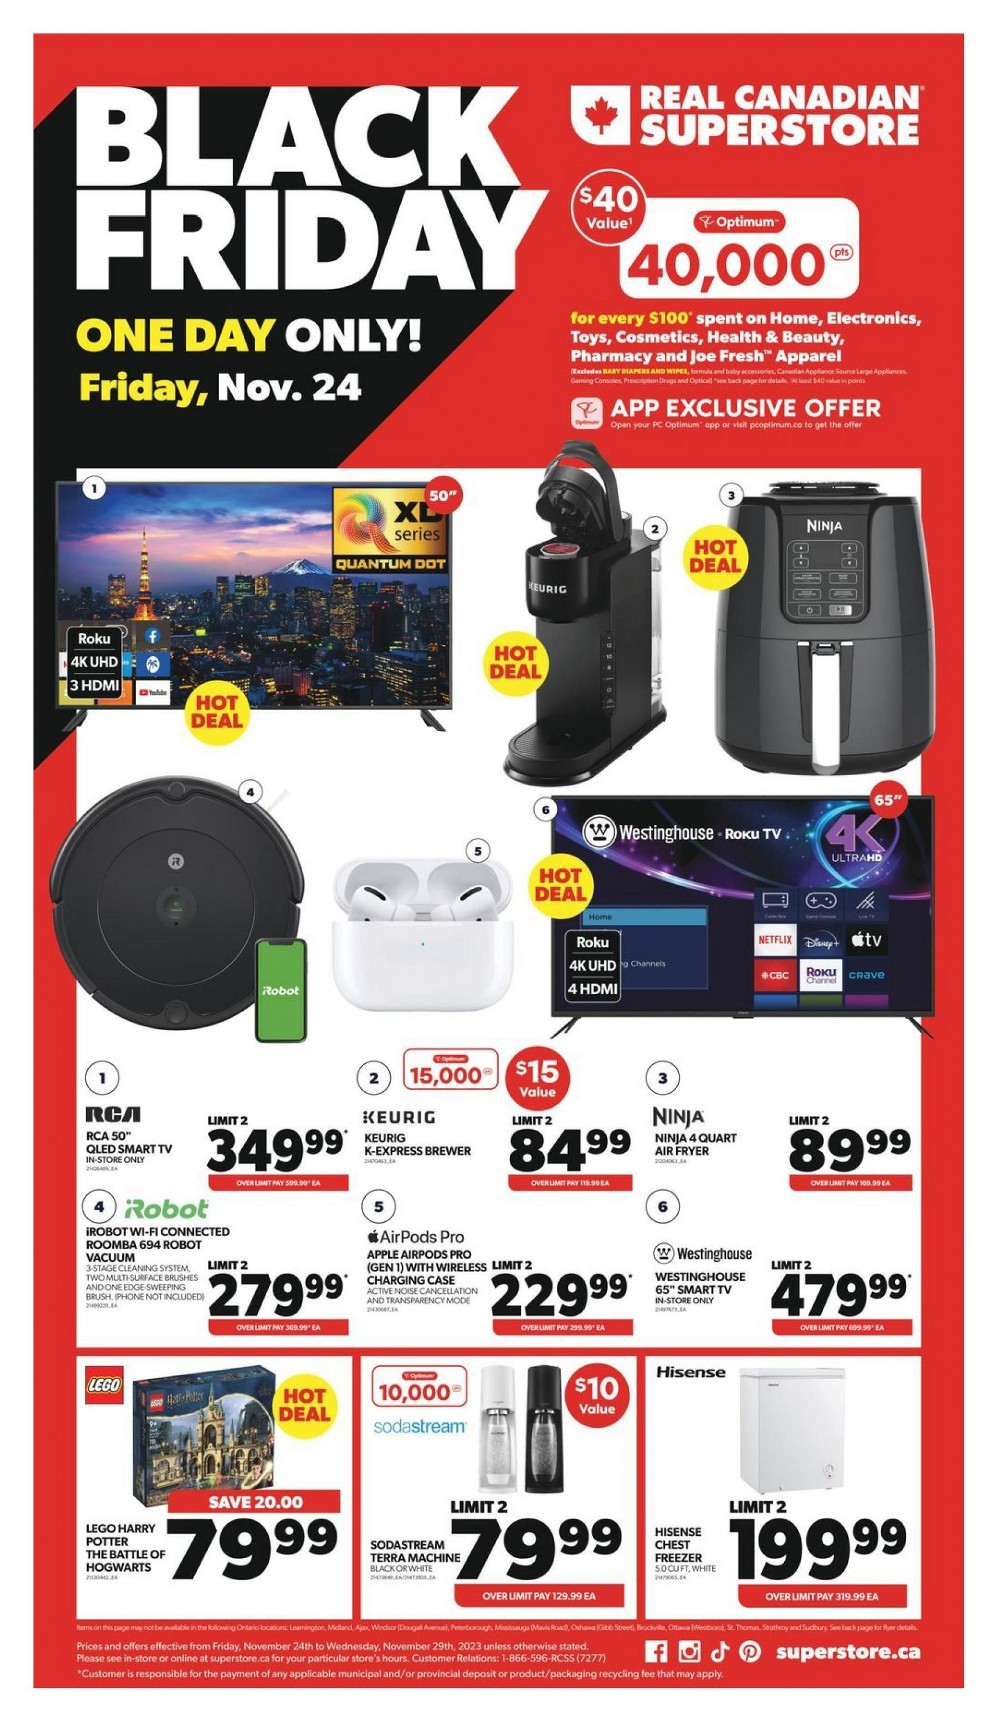 Real Canadian Superstore Black Friday Flyer 2023 1 – real canadian black friday